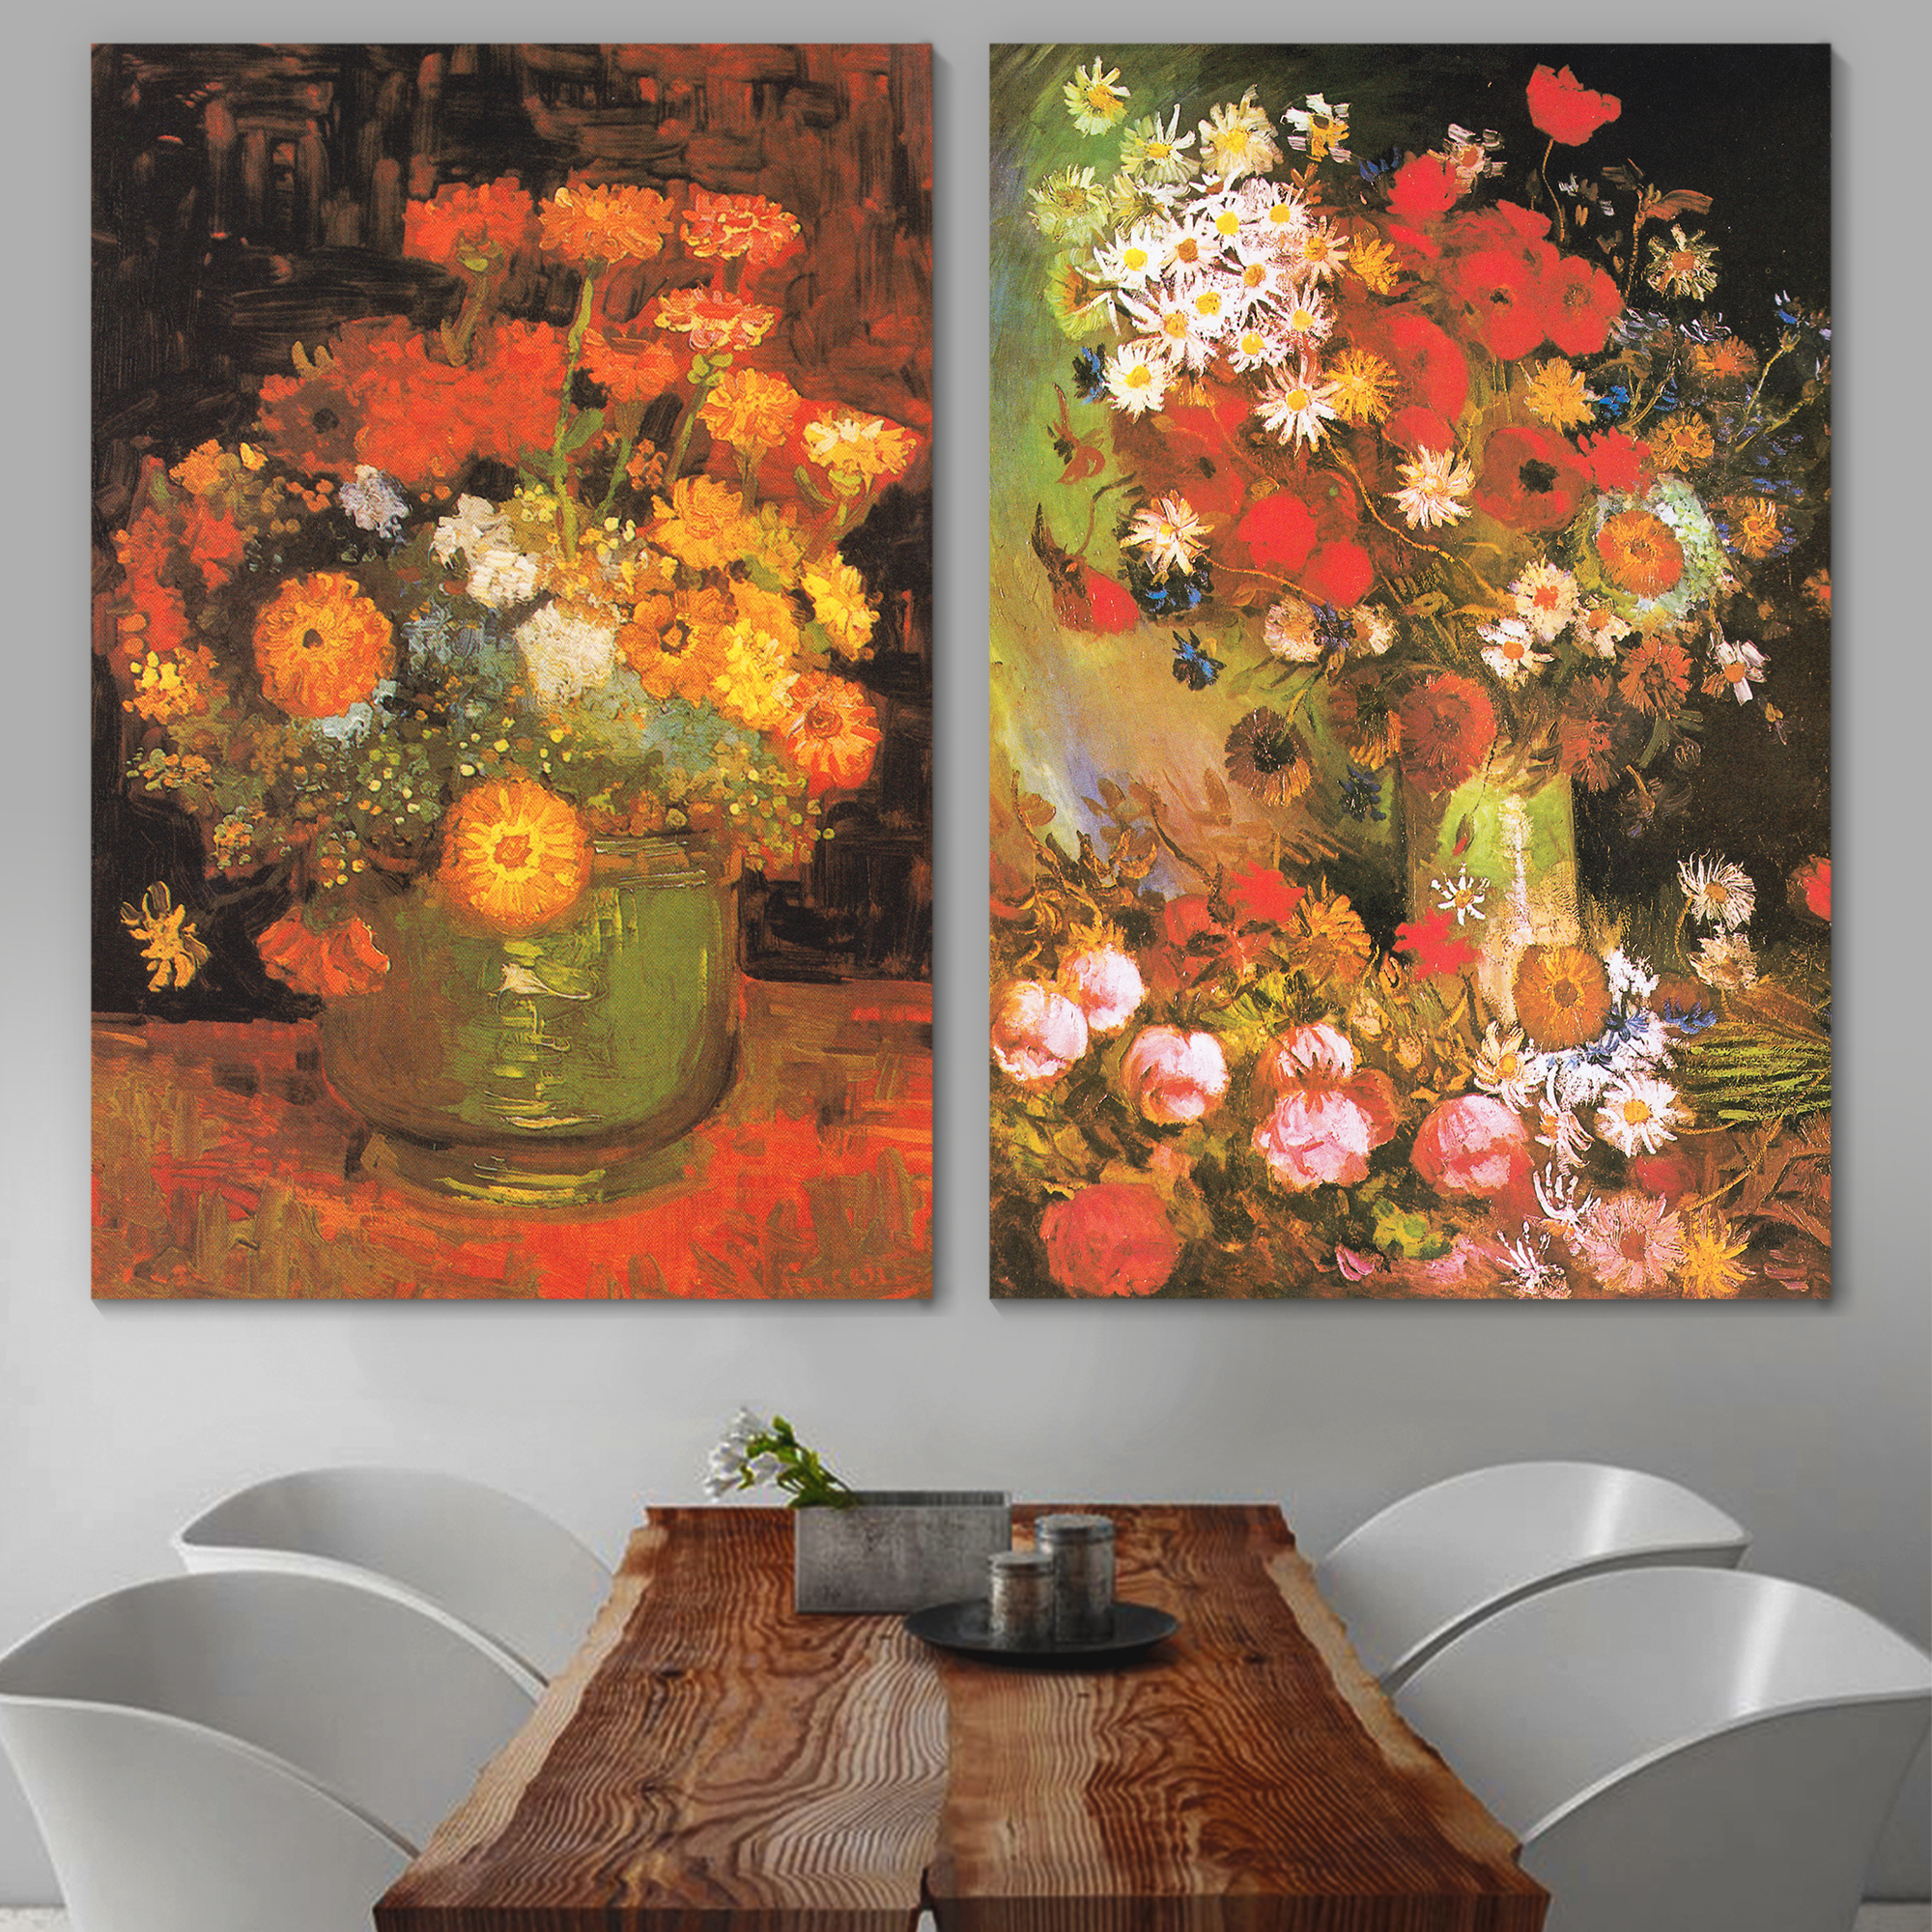 Bowl with Peonies and Roses/Vase with Zinnias by Vincent Van Gogh - Oil Painting Reproduction in Set of 2 | Canvas Prints Wall Art, Ready to Hang - 16